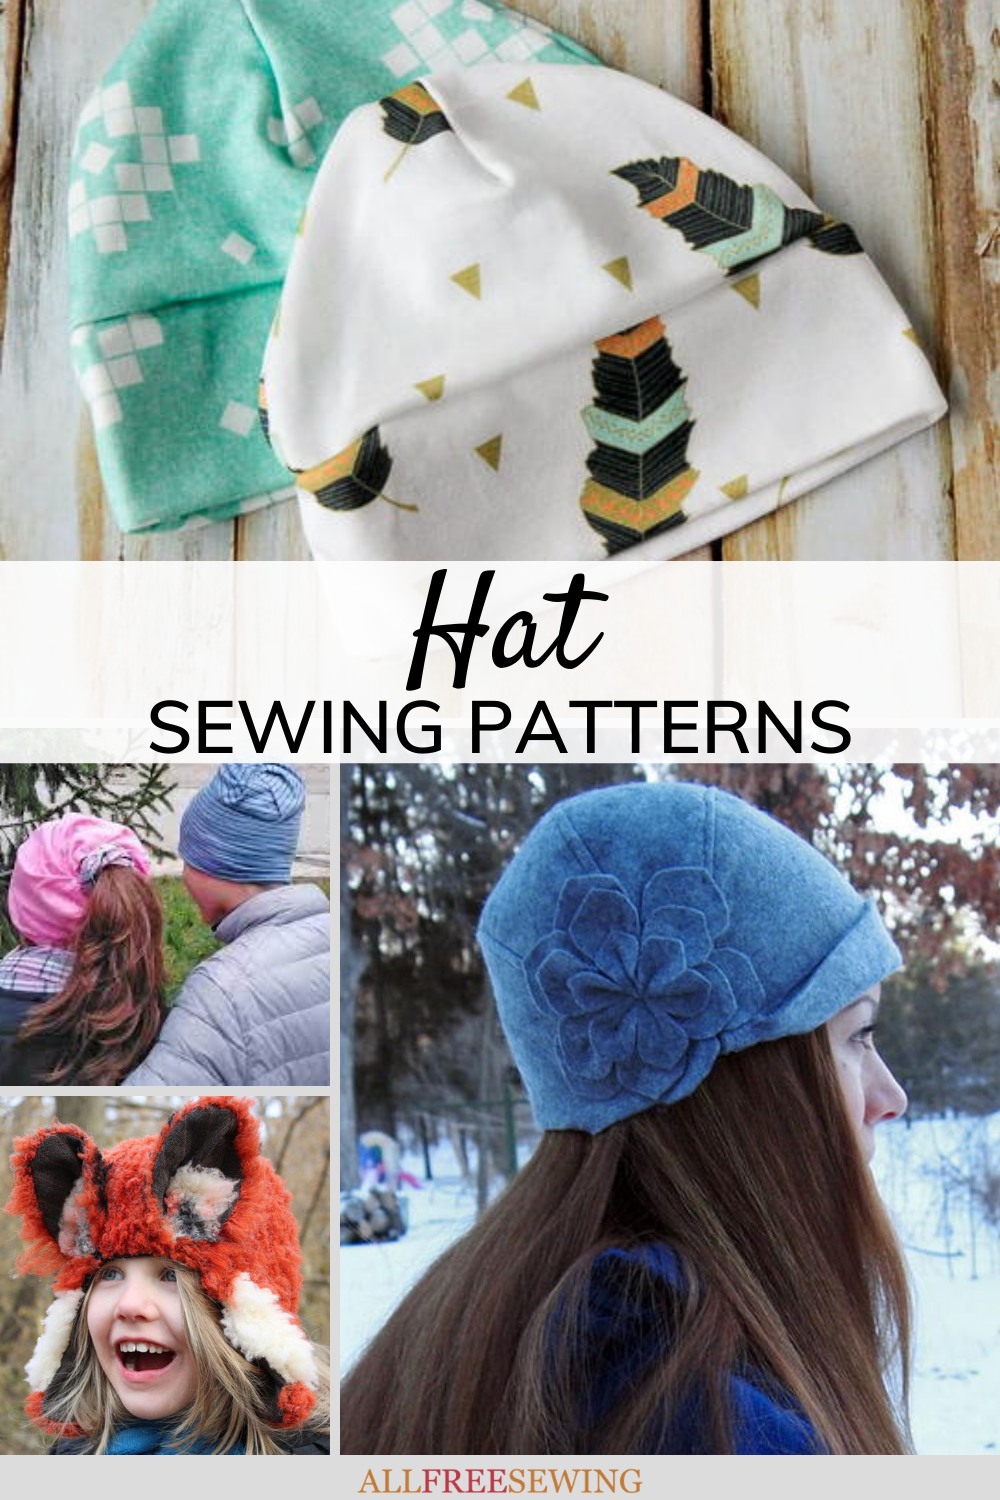 P-ART-Y: How to make an easy no sew fleece hat and scarf?